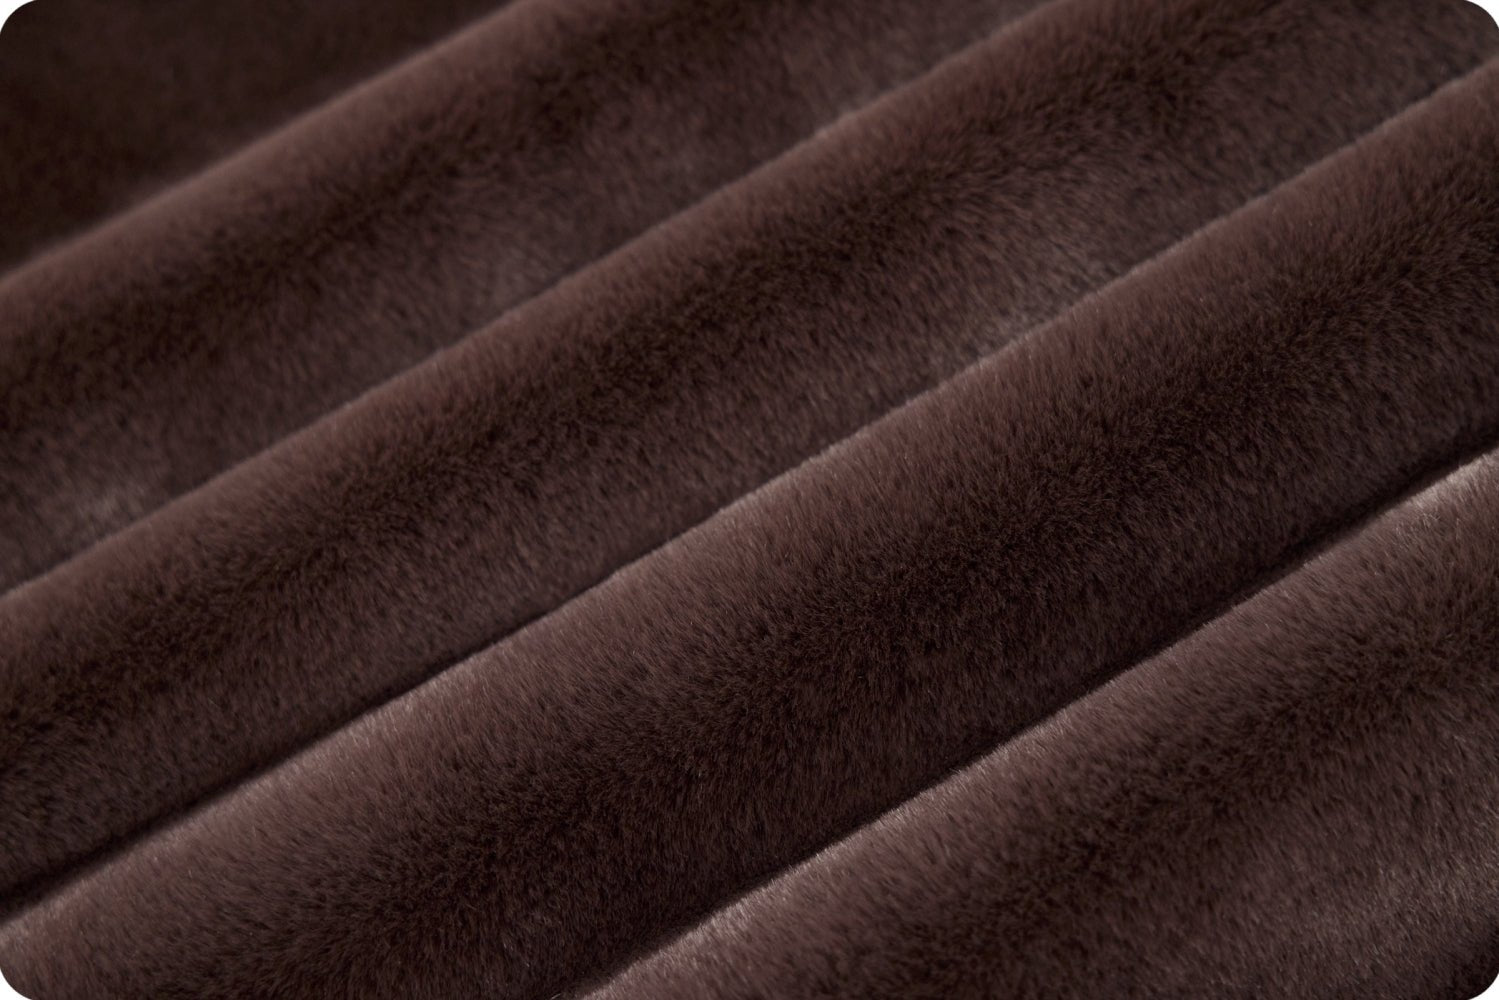 Shannon Fabrics Luxe Cuddle Encore Chocolate Minky Fabric - On Pins & Needles Quilting Co.